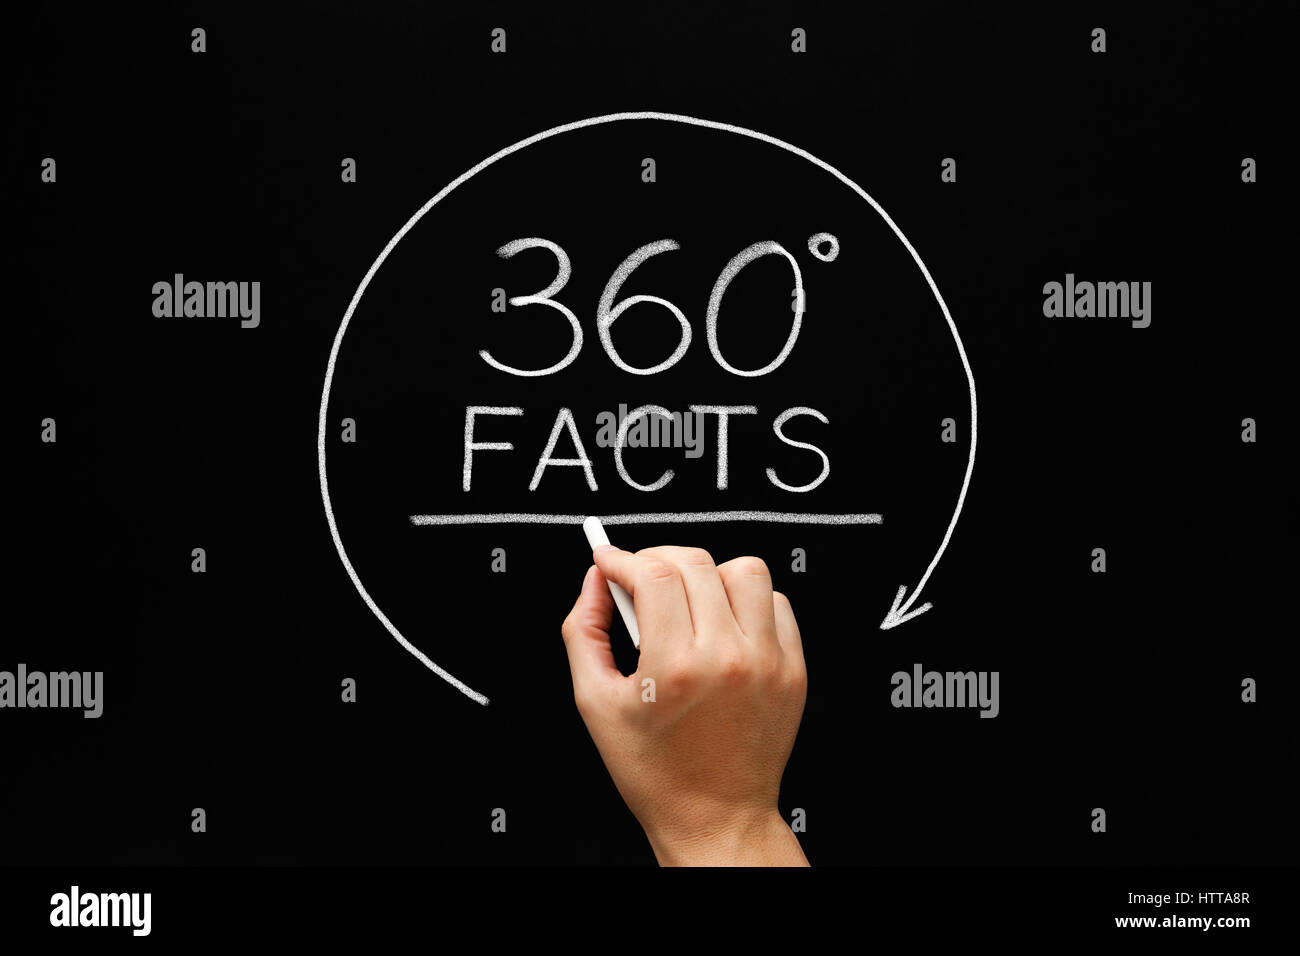 Hand sketching 360 degrees Facts concept with white chalk on blackboard. Stock Photo